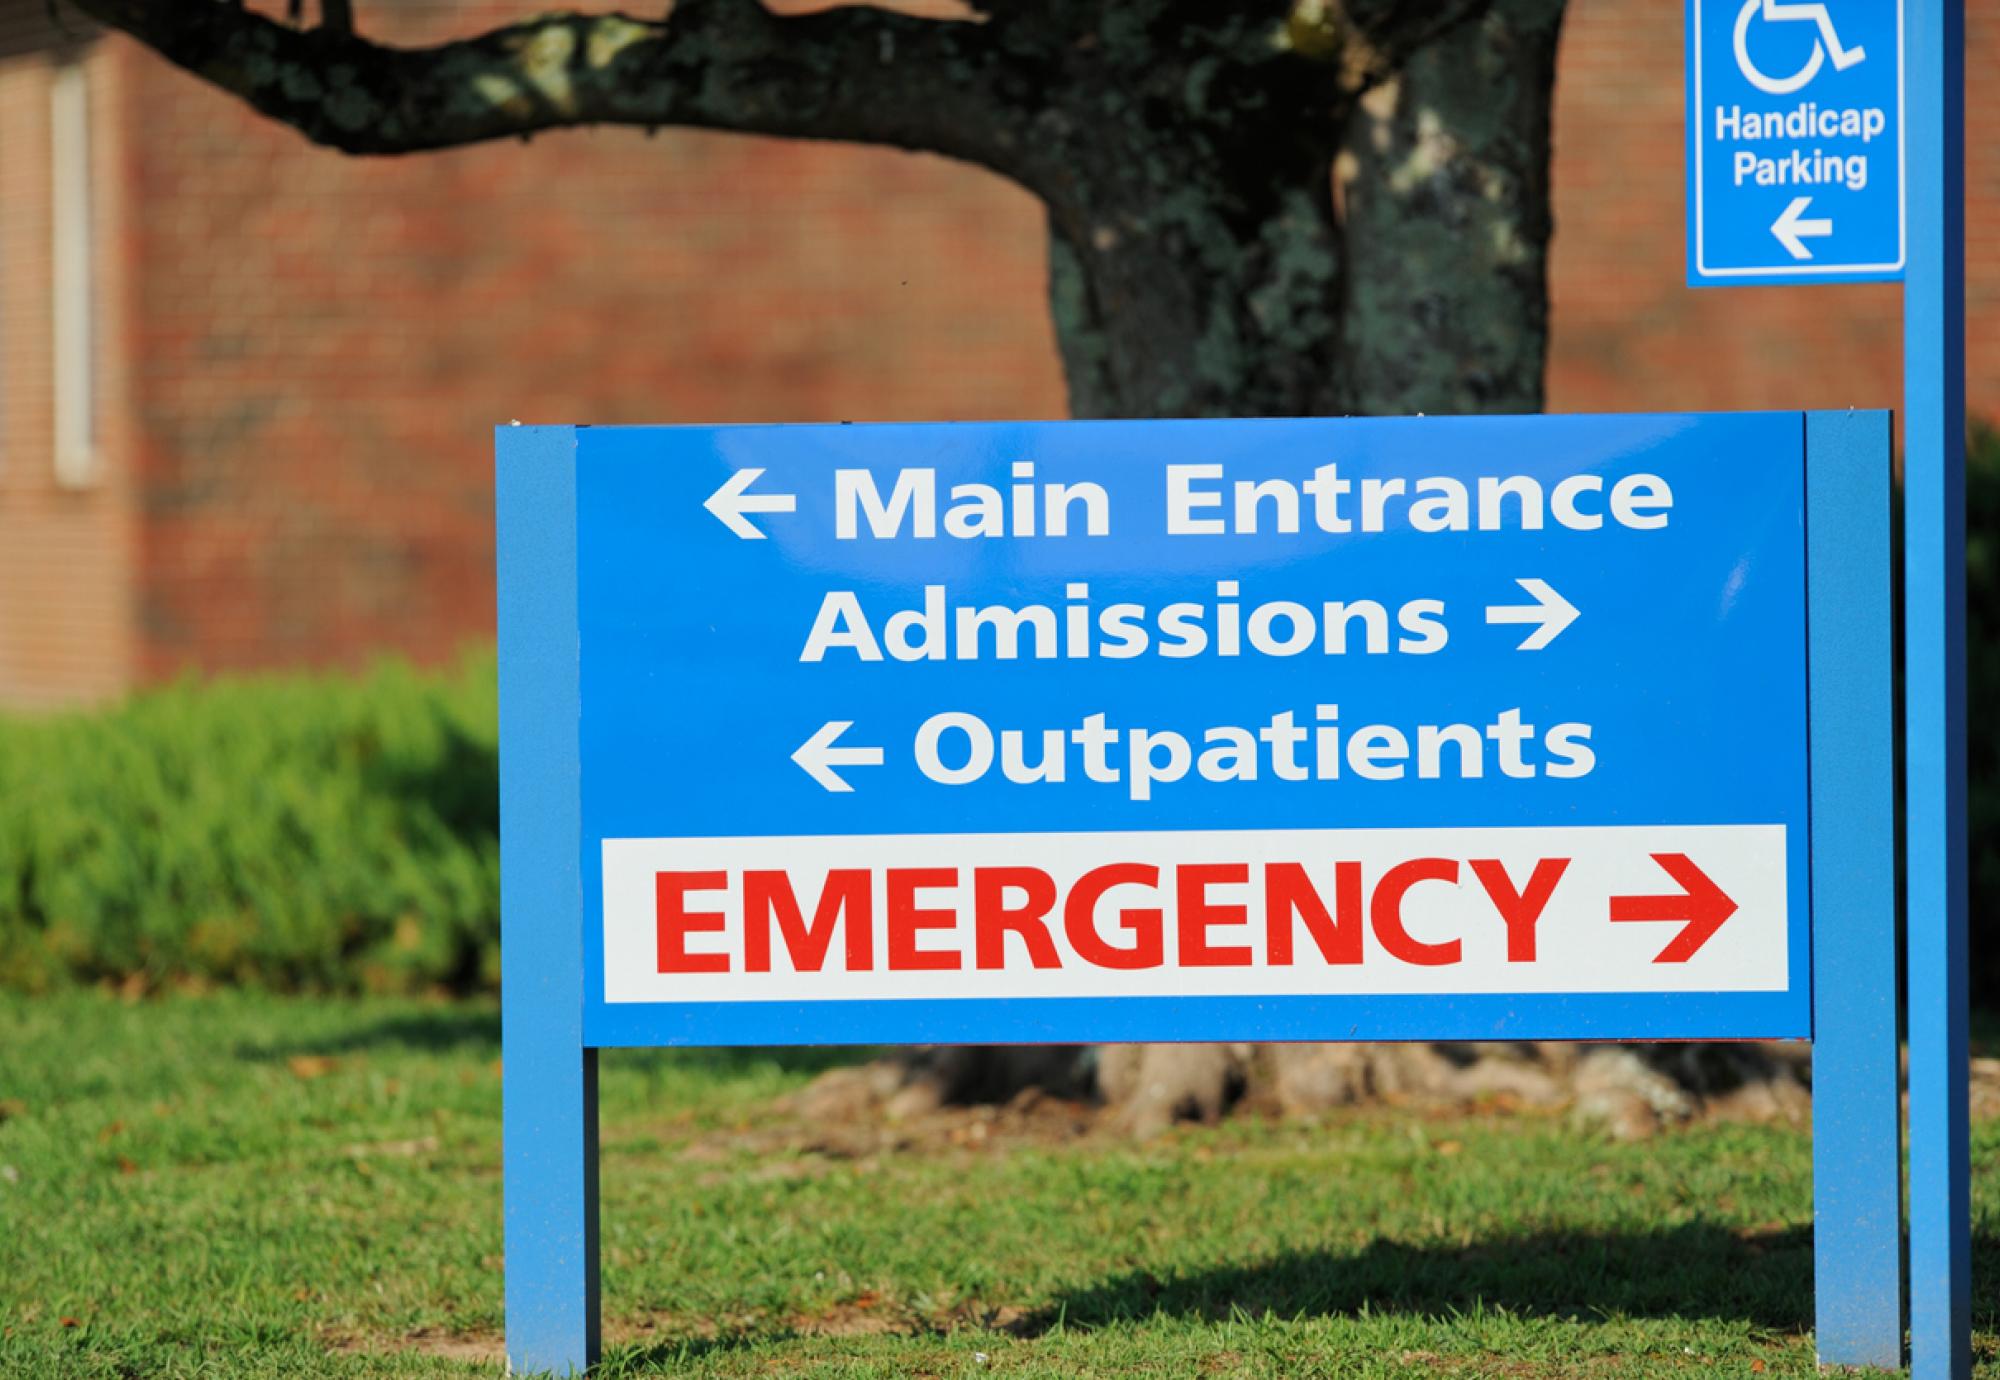 Main entrance, admissions, outpatients and emergency room sign